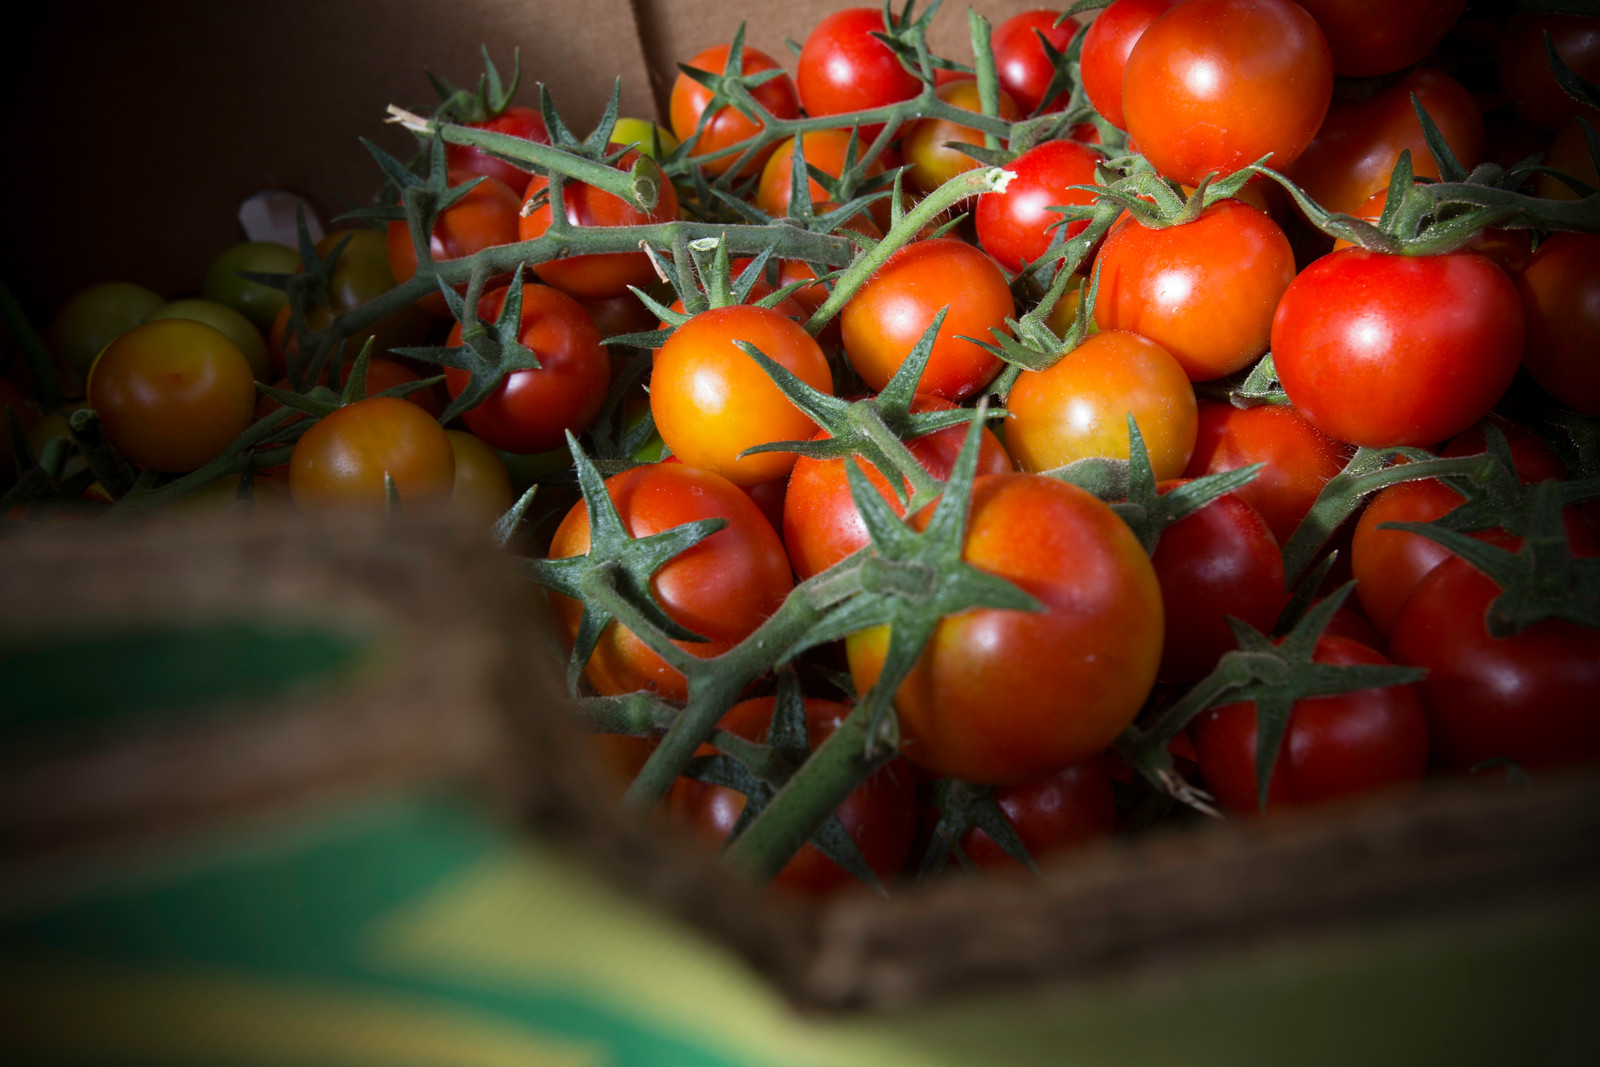 Image of tomatoes